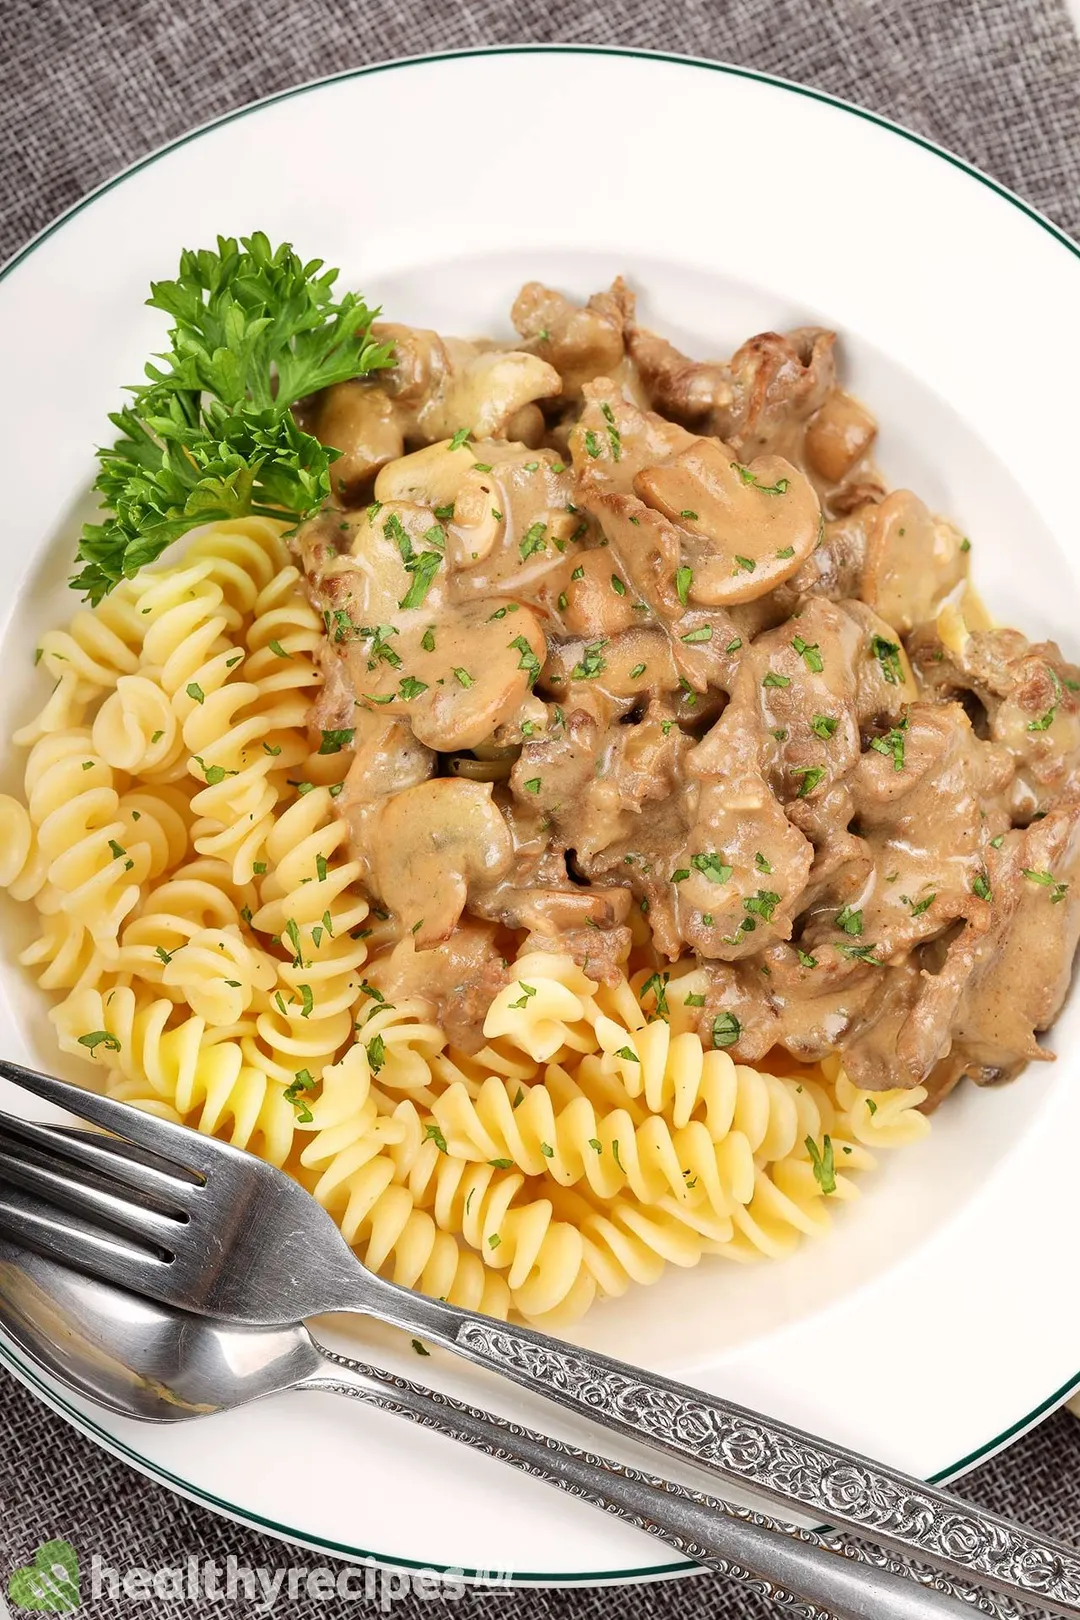 a plate of Beef Stroganoff with pasta and fork, spoon for garnish